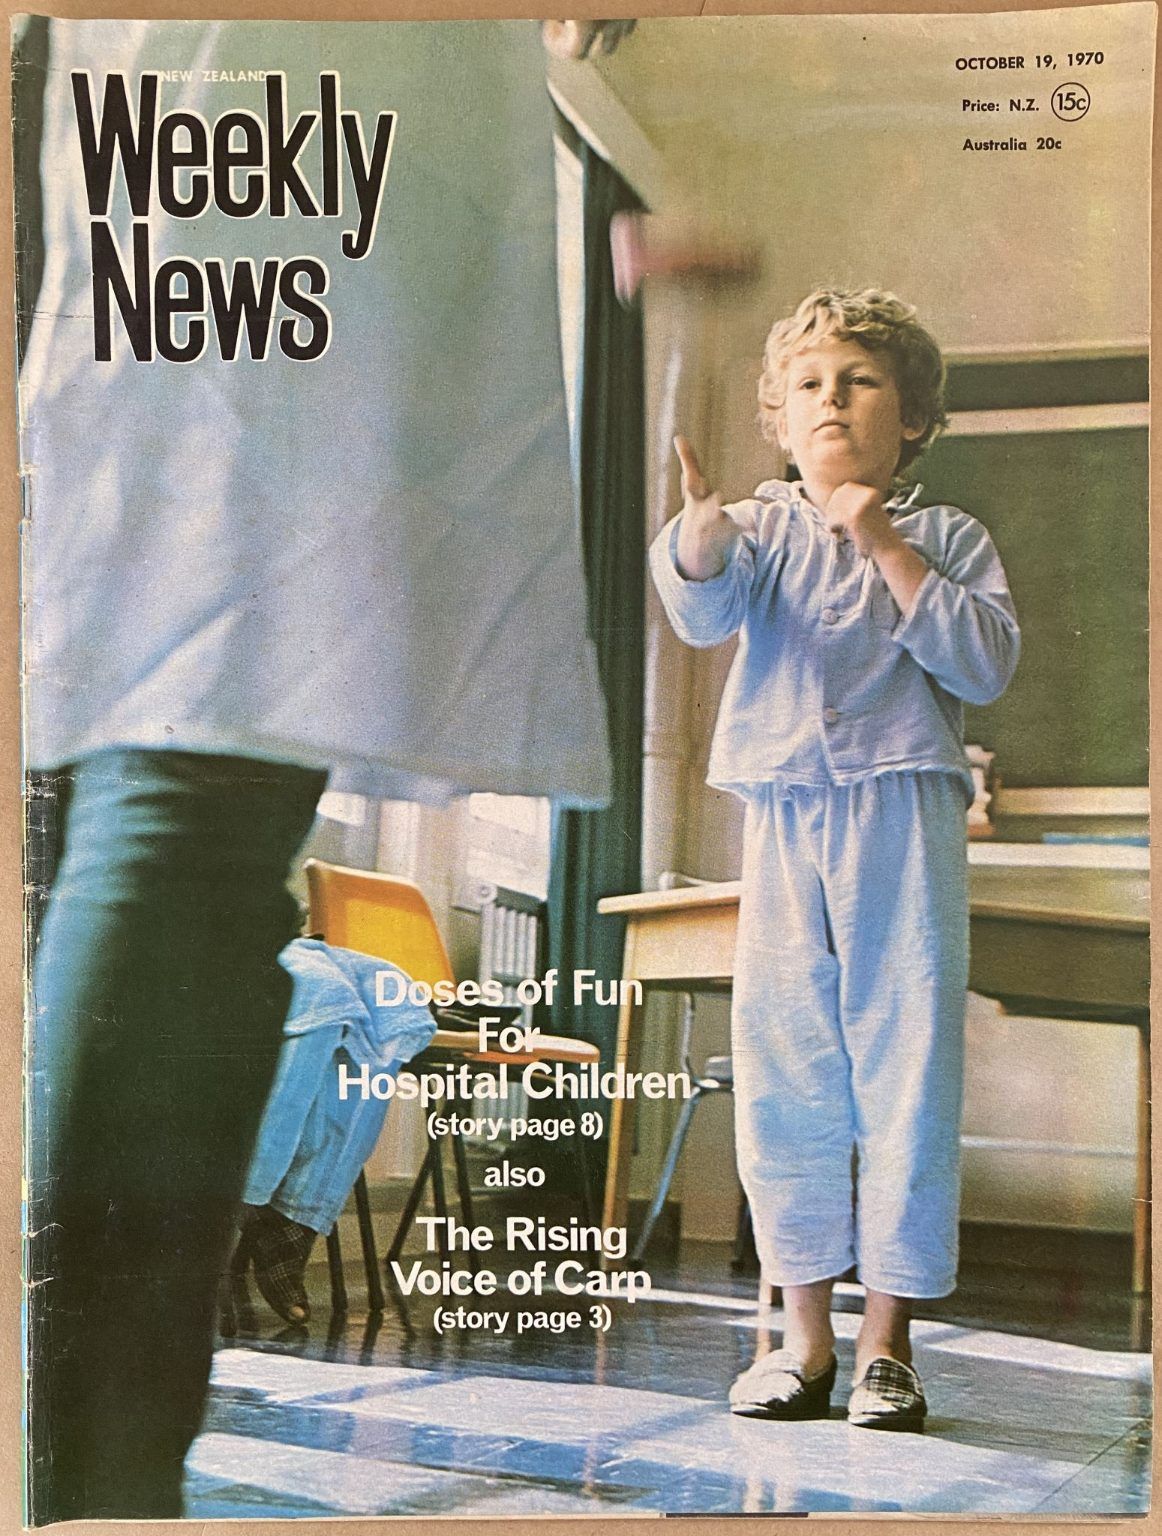 OLD NEWSPAPER: New Zealand Weekly News, No. 5576, 19 October 1970